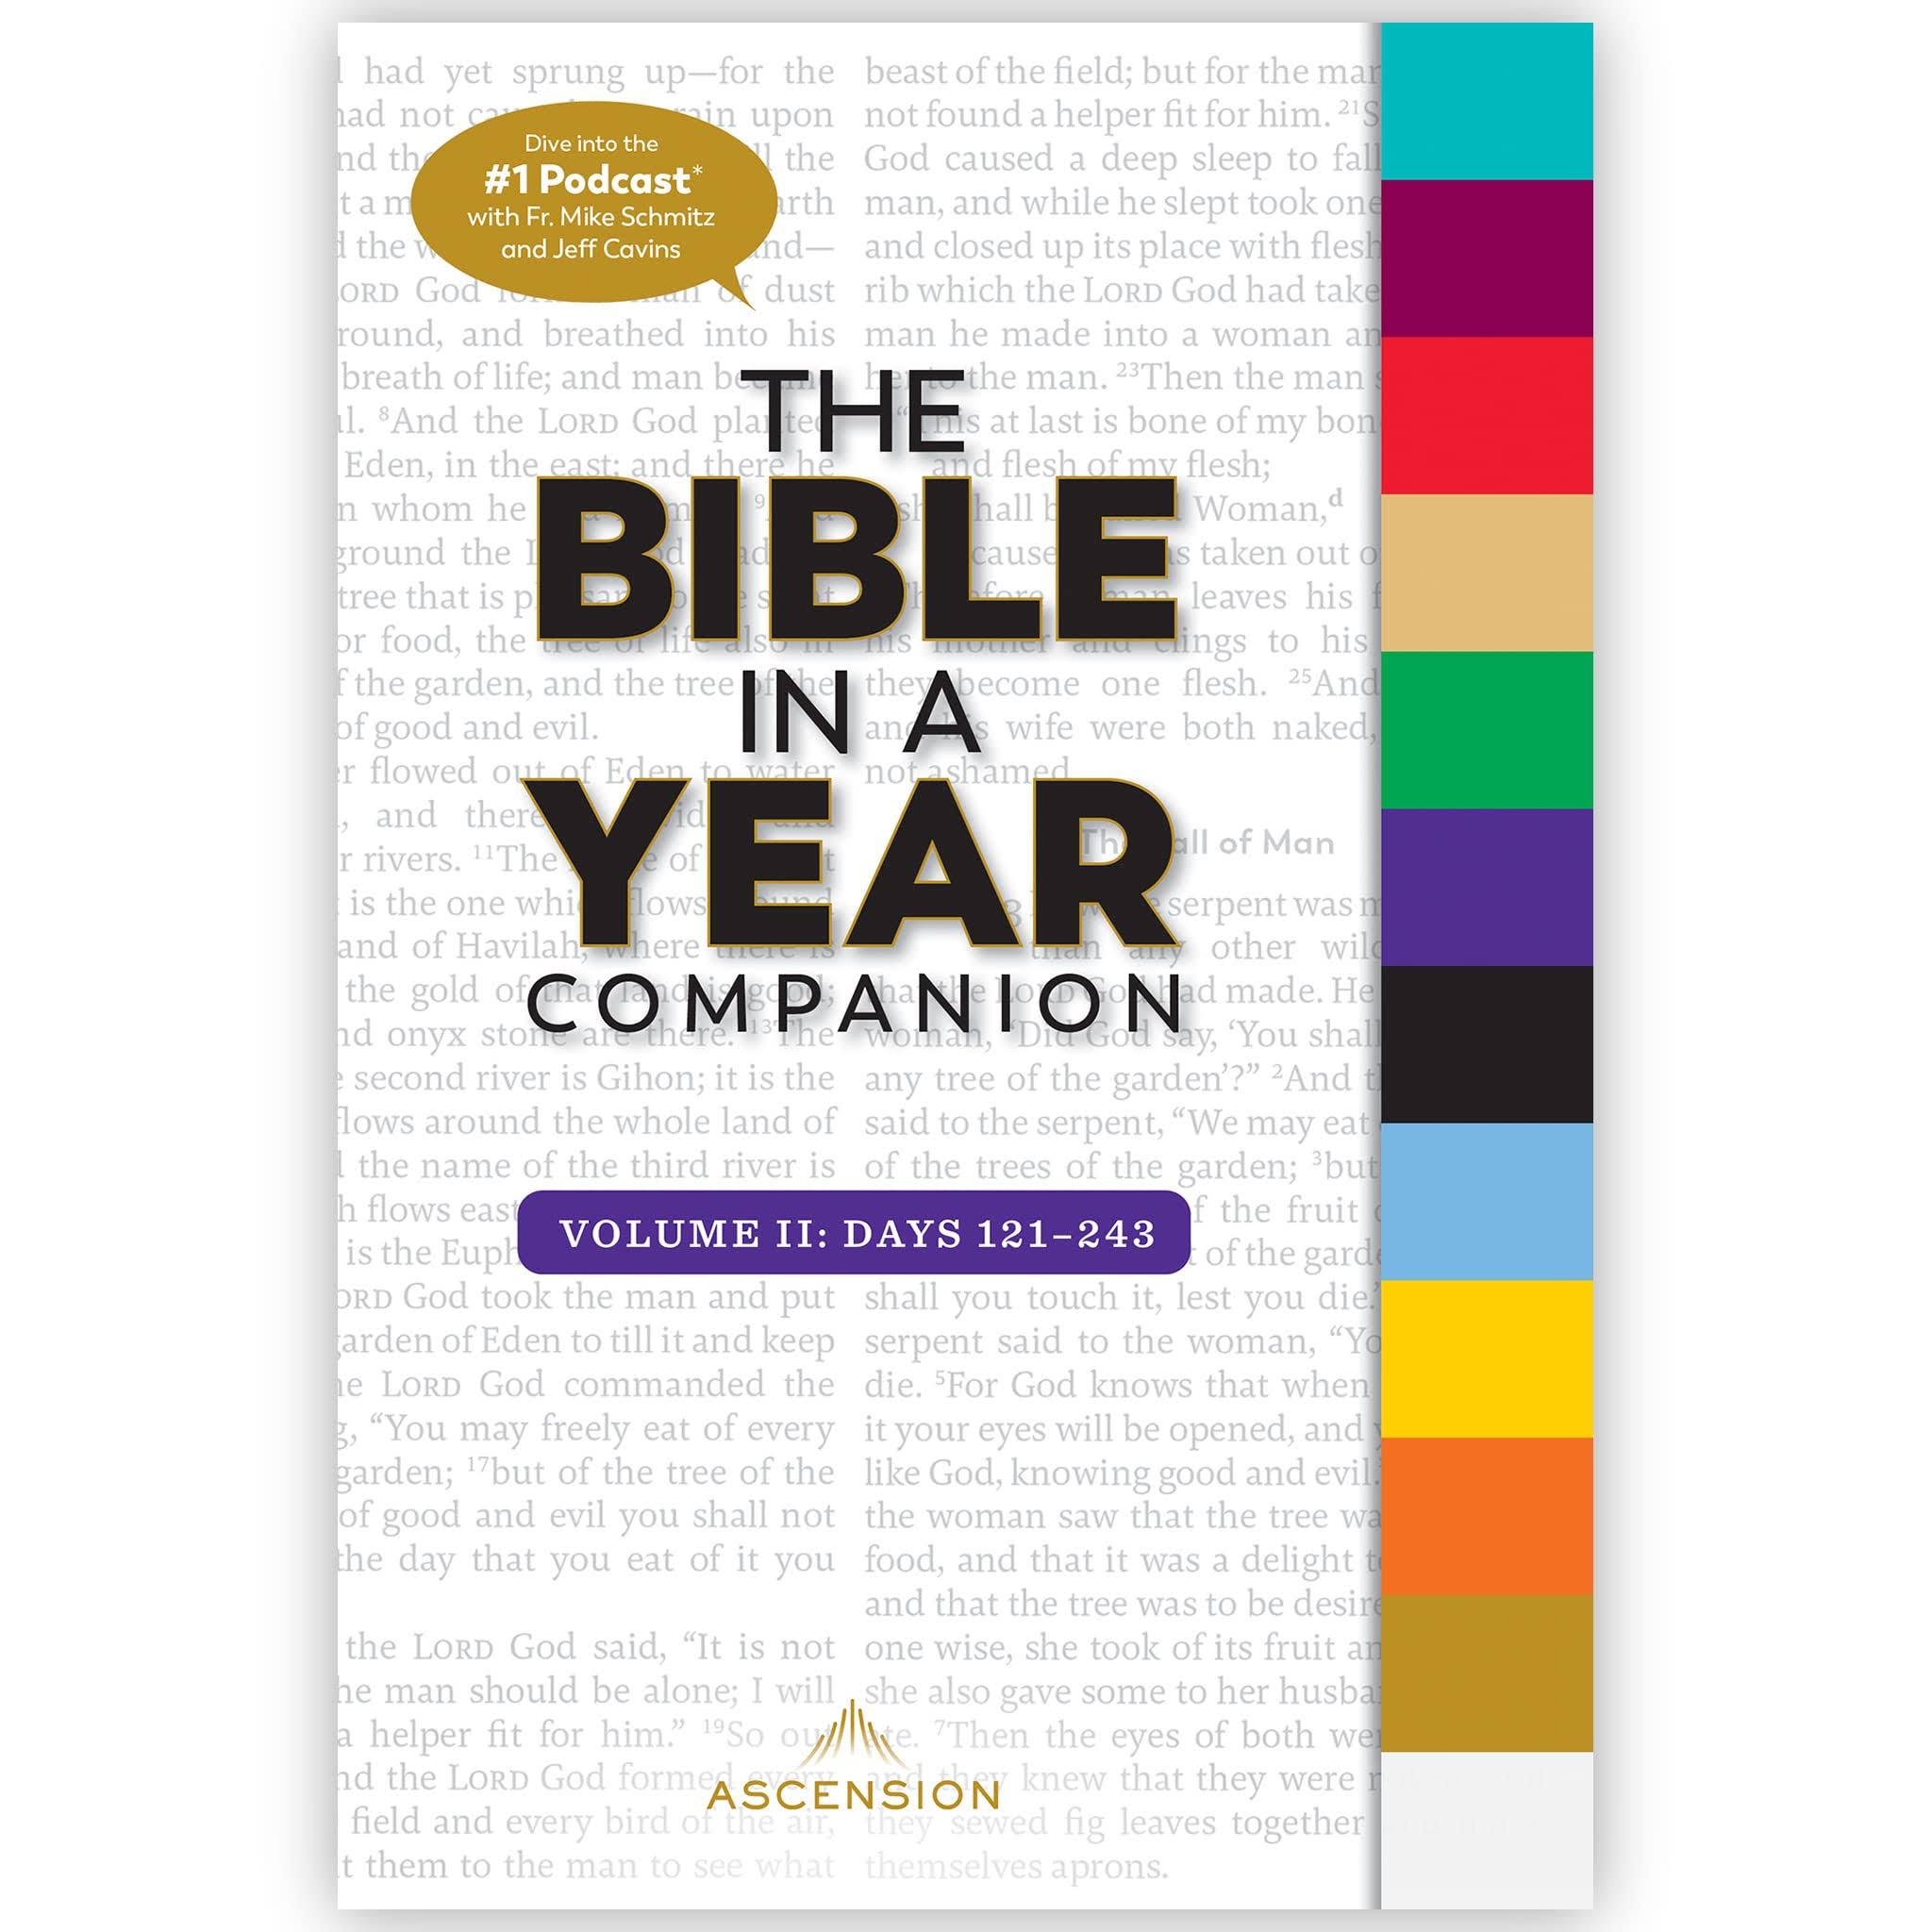 Bible in a Year Companion, Vol 2 by Mike Schmitz